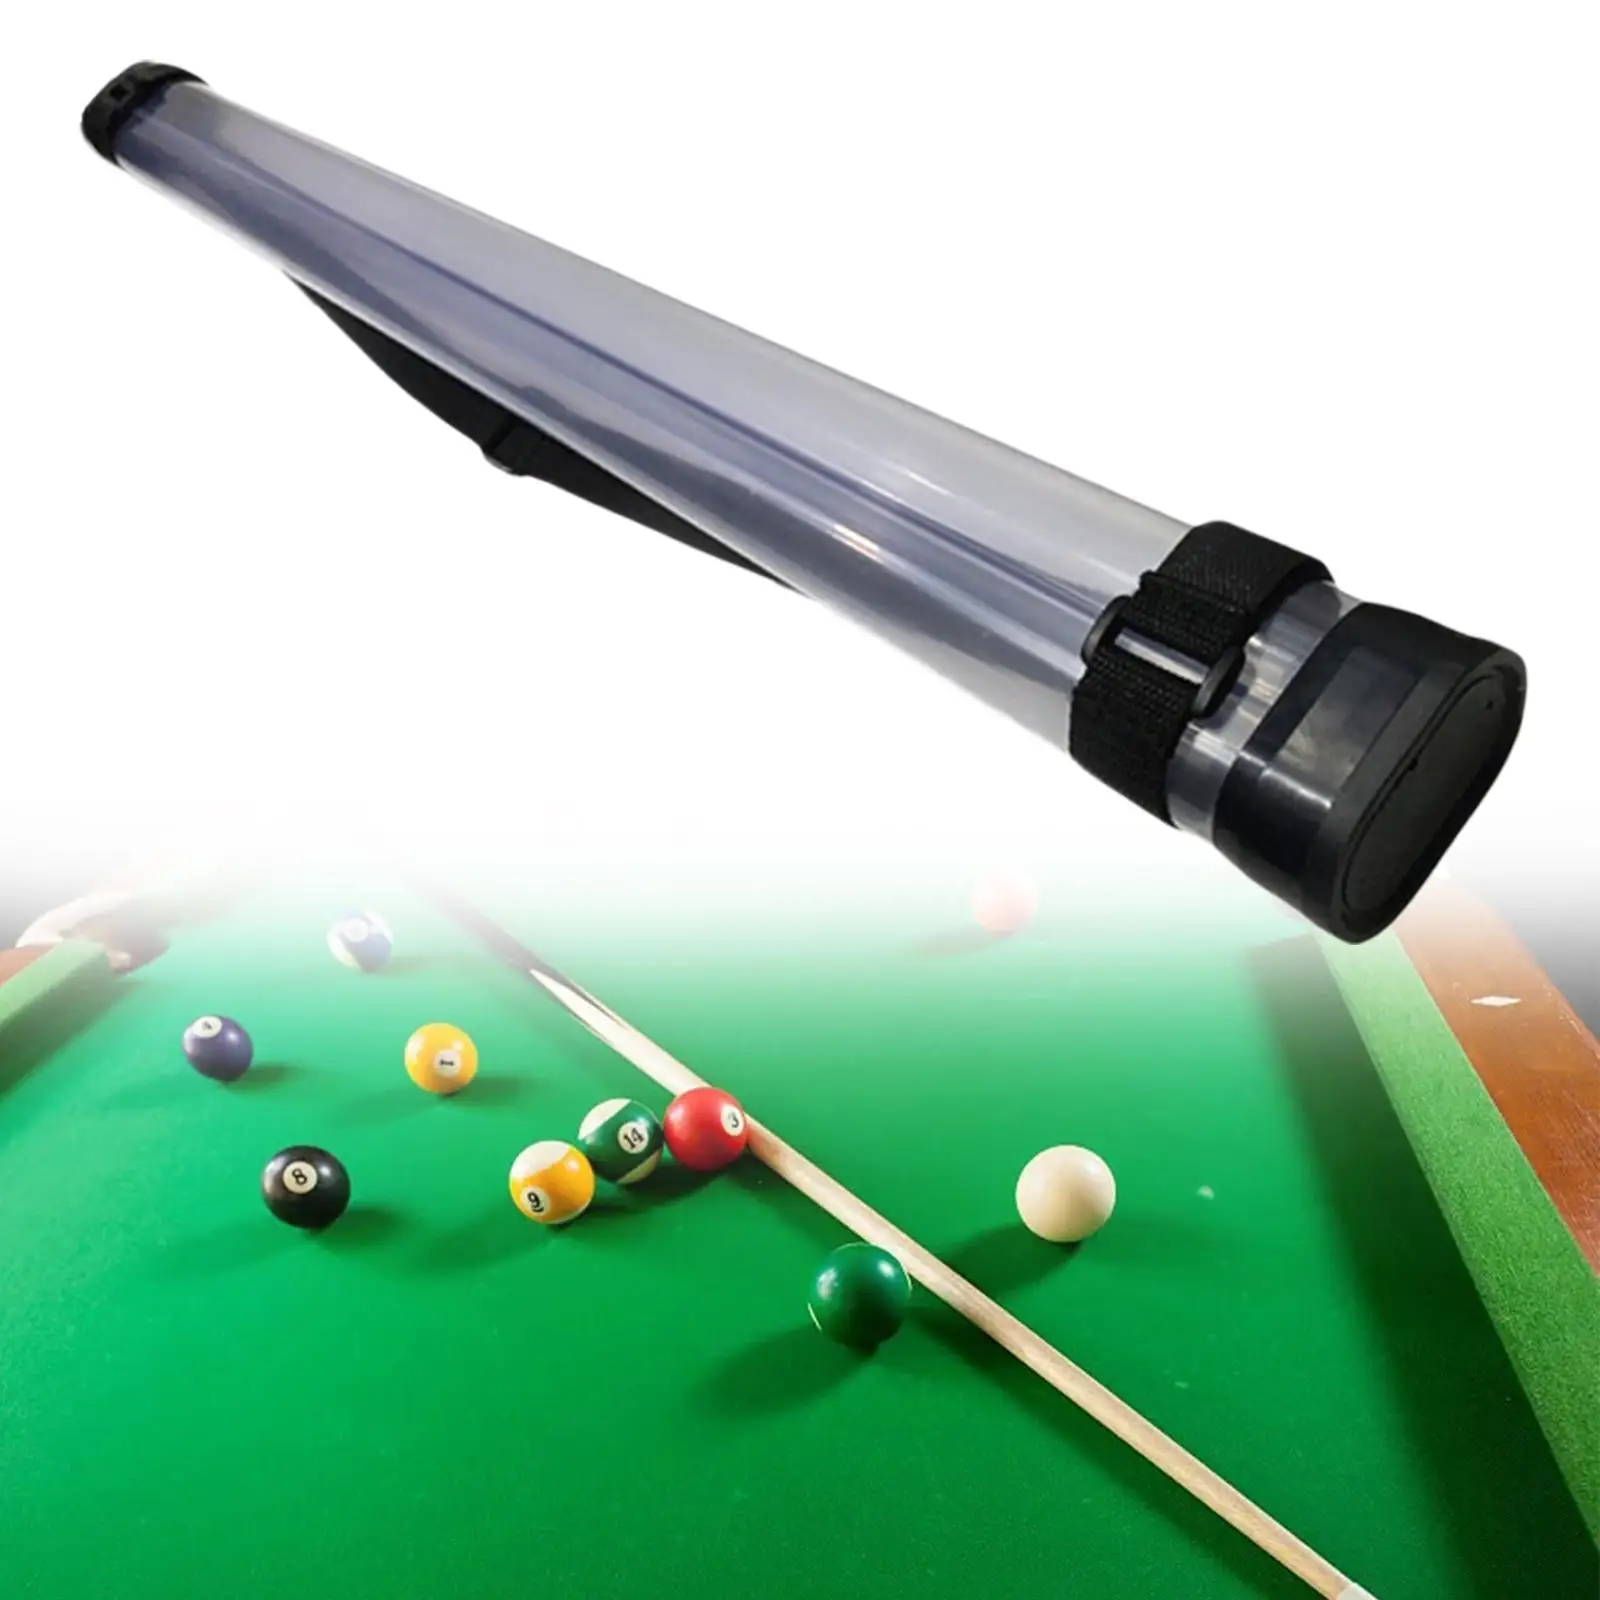 Billiards Pool Cue Case Professional Holds Durable Long Tube Billiard Stick Carrying Case for 1 Complete 2 Pcs Cue Billiard Rod